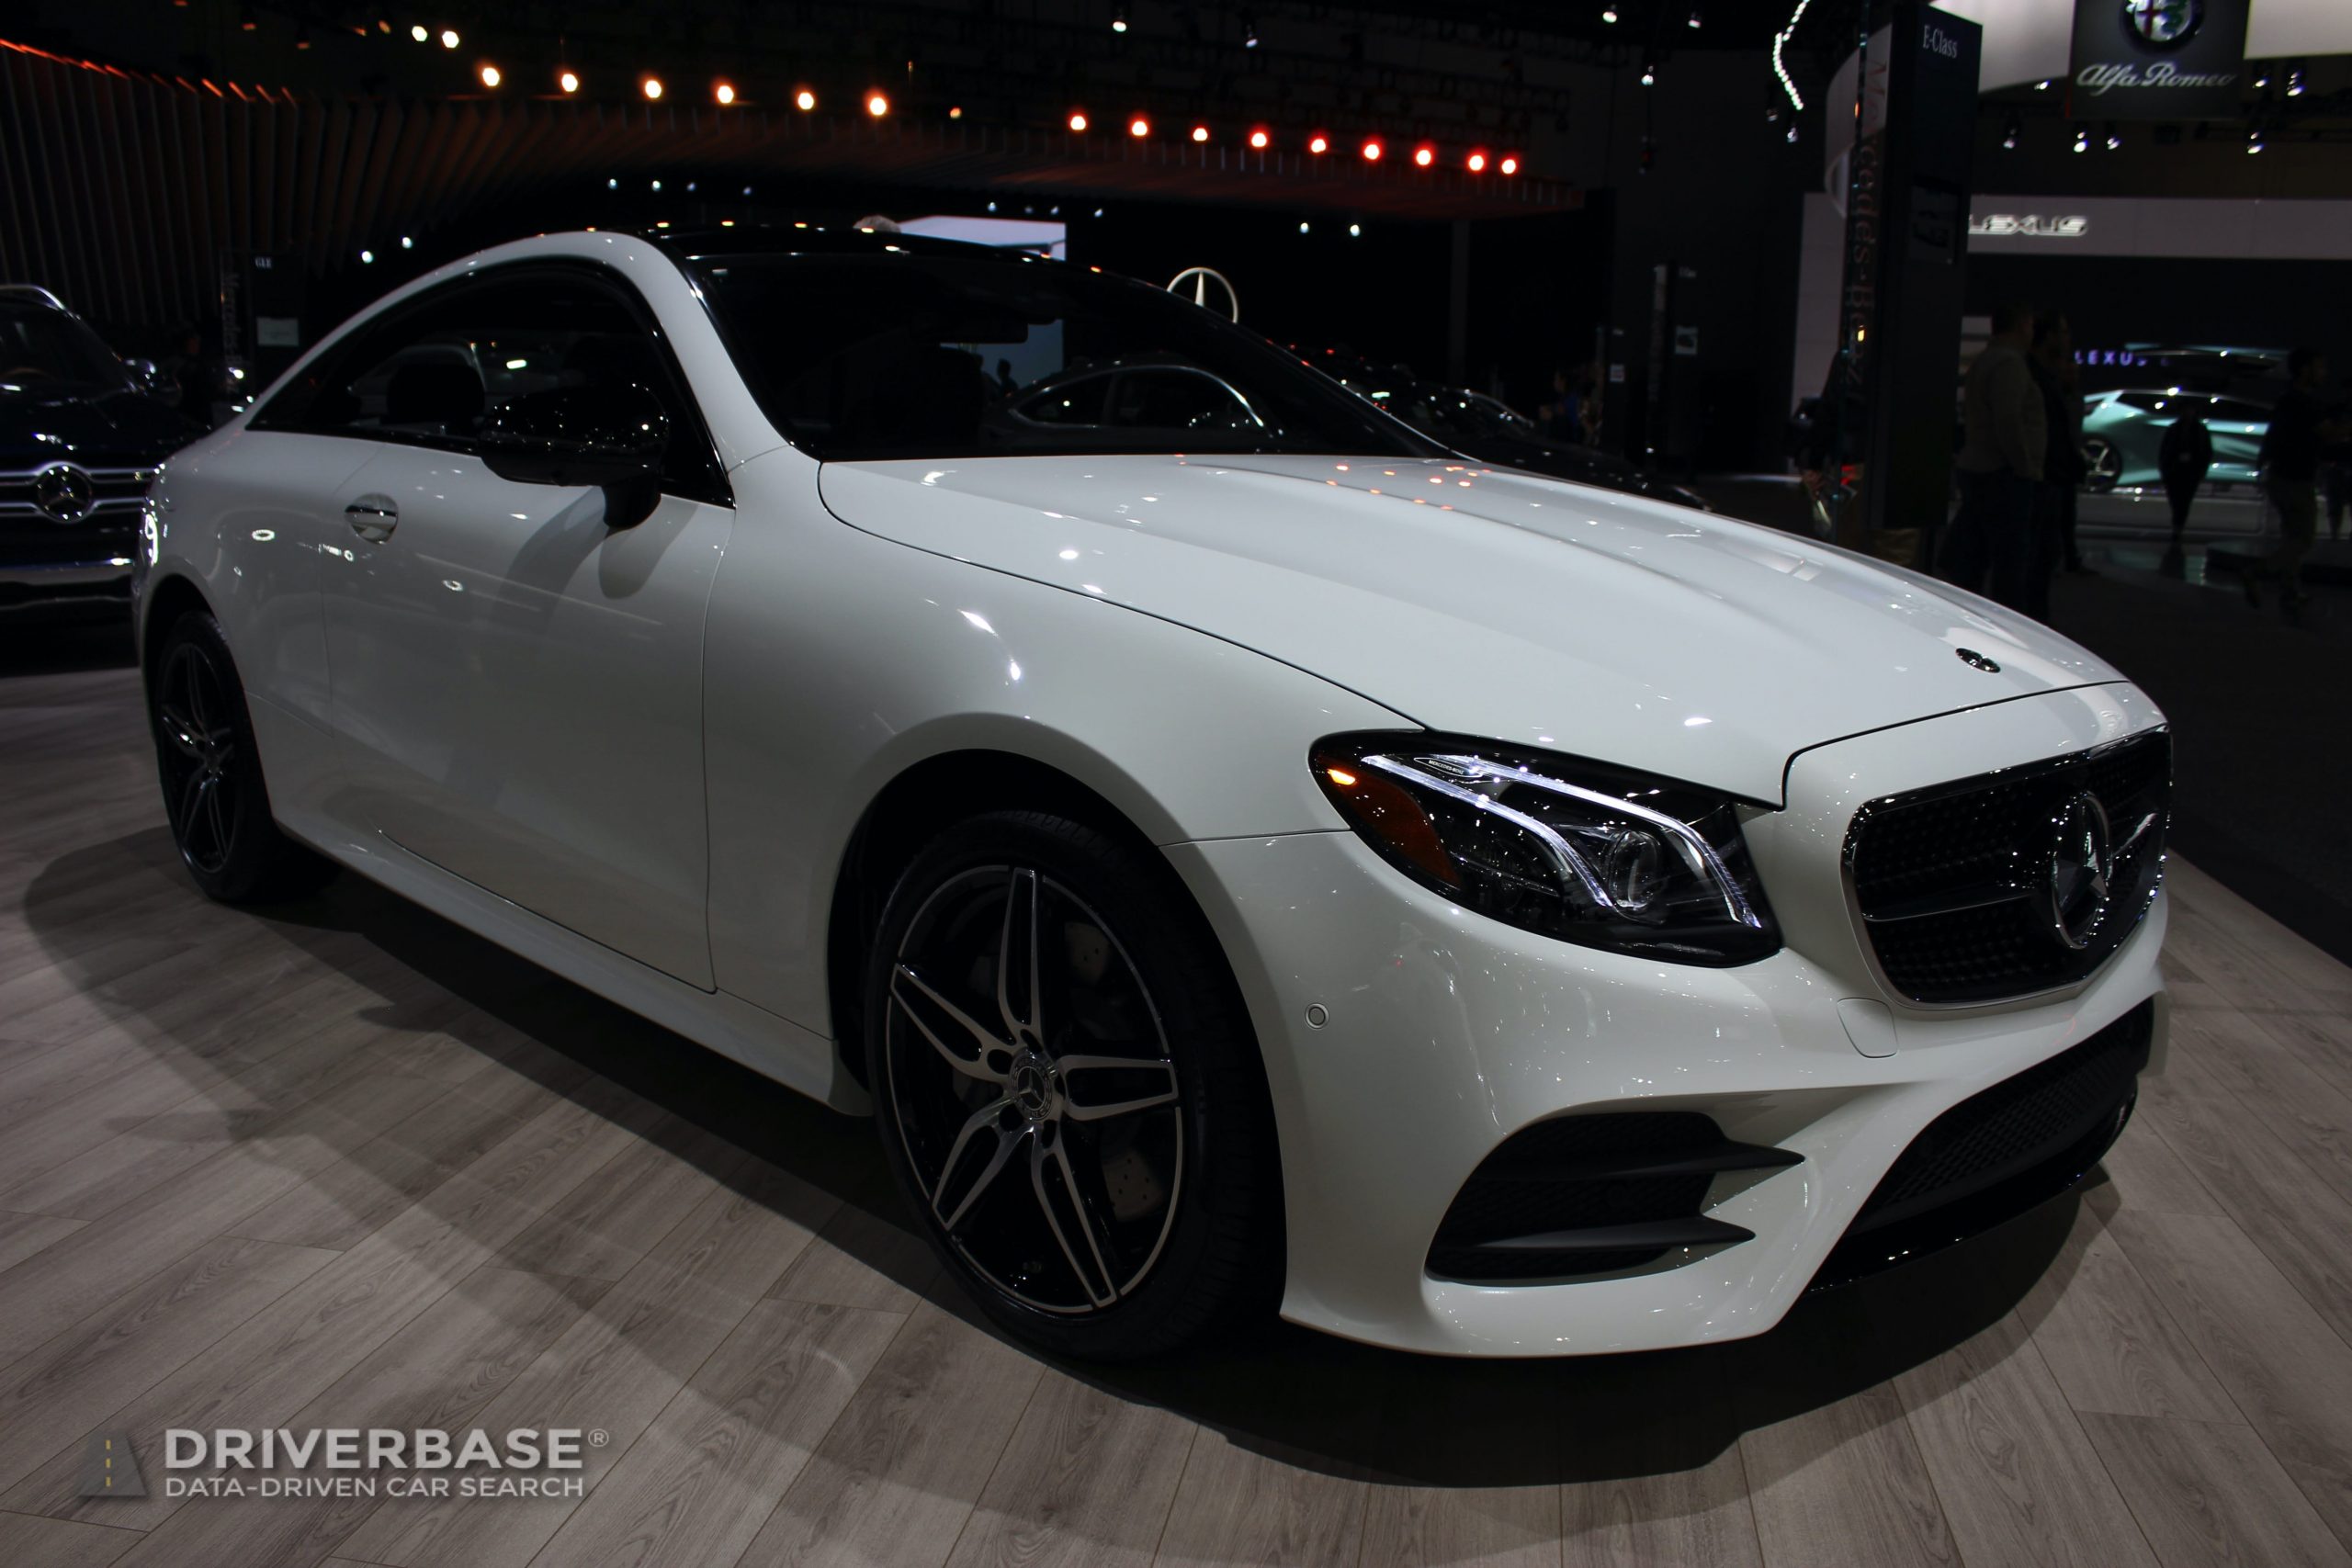 2020 Mercedes-Benz E 450 Coupe at the 2019 Los Angeles Auto Show